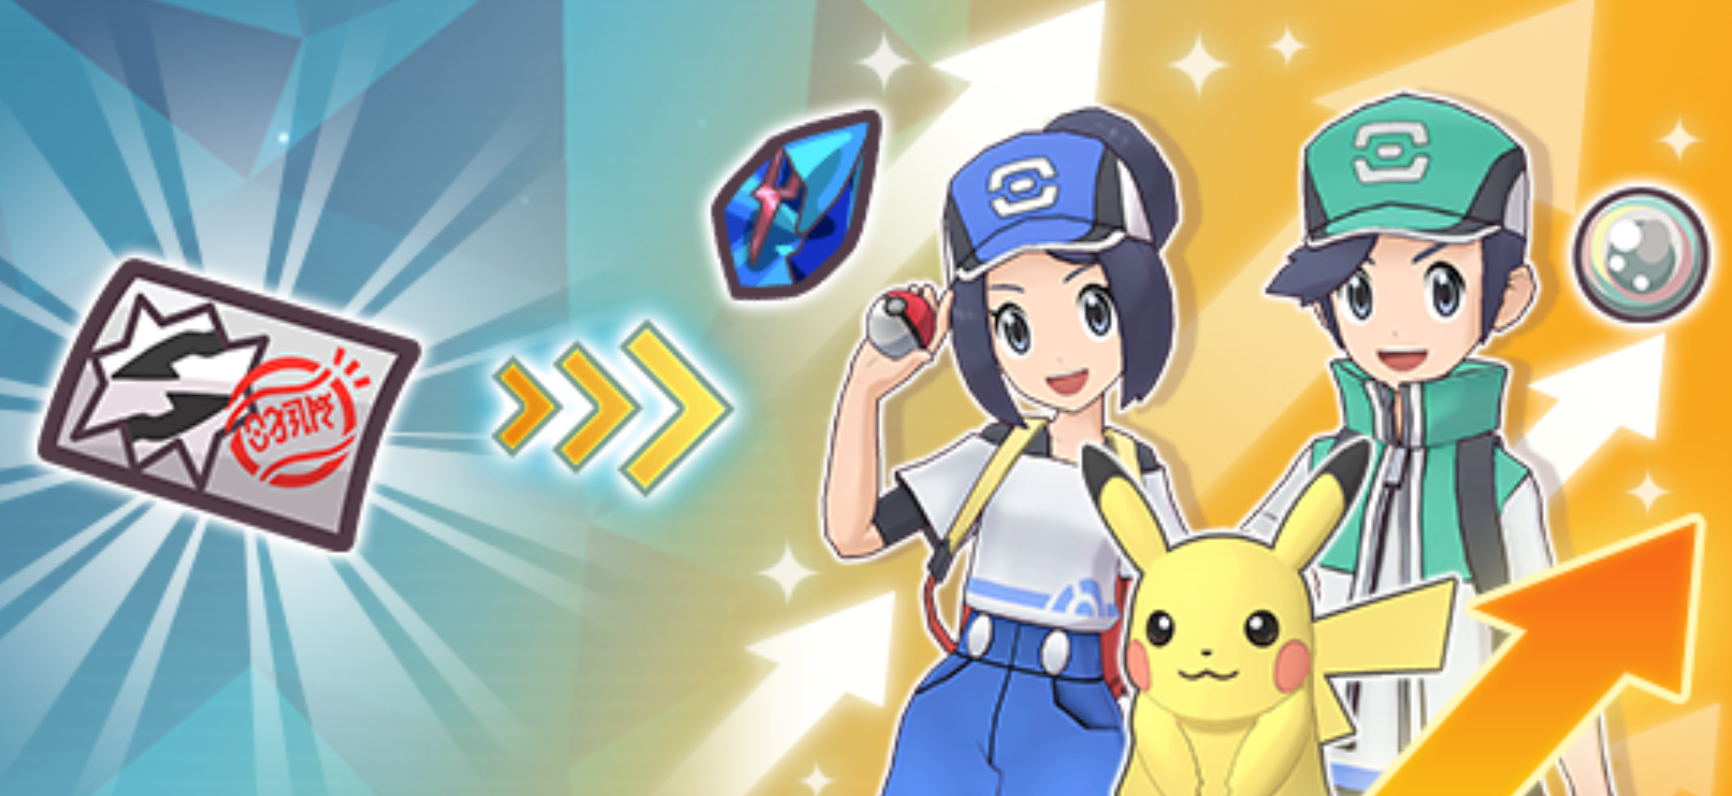 Pokémon Sword and Shield for Android & iOS Download - POKÉMON